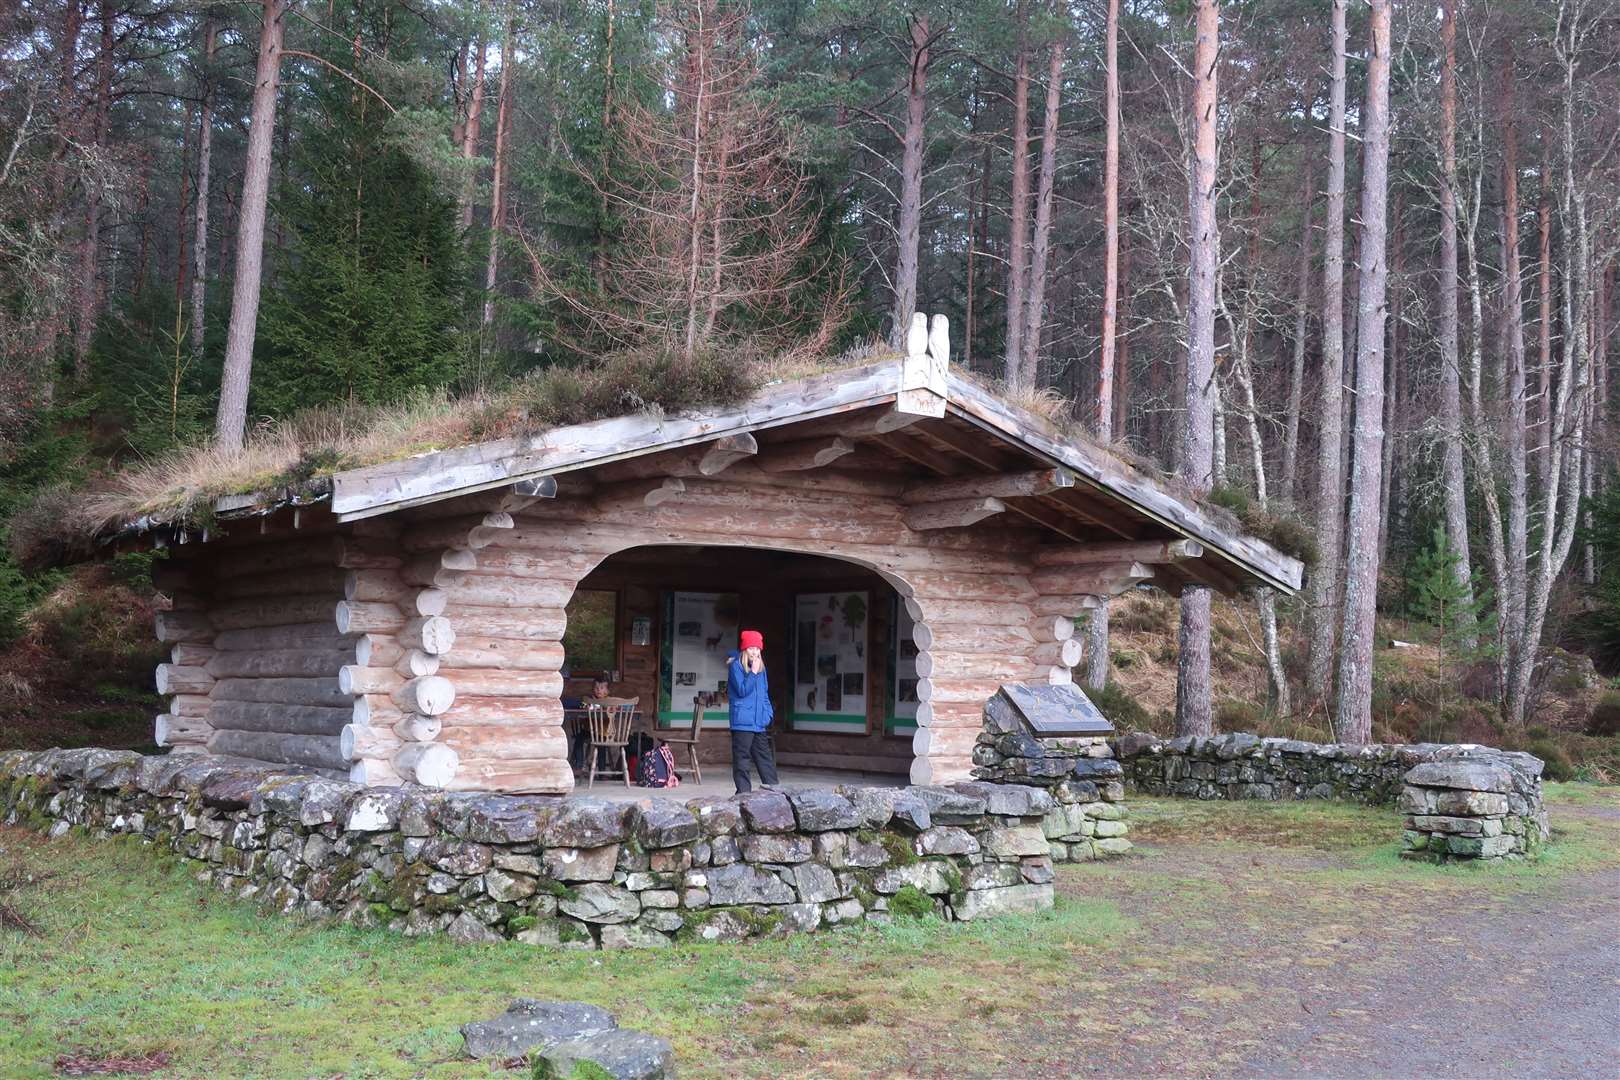 The log cabin at the start of the Rosehall trails.